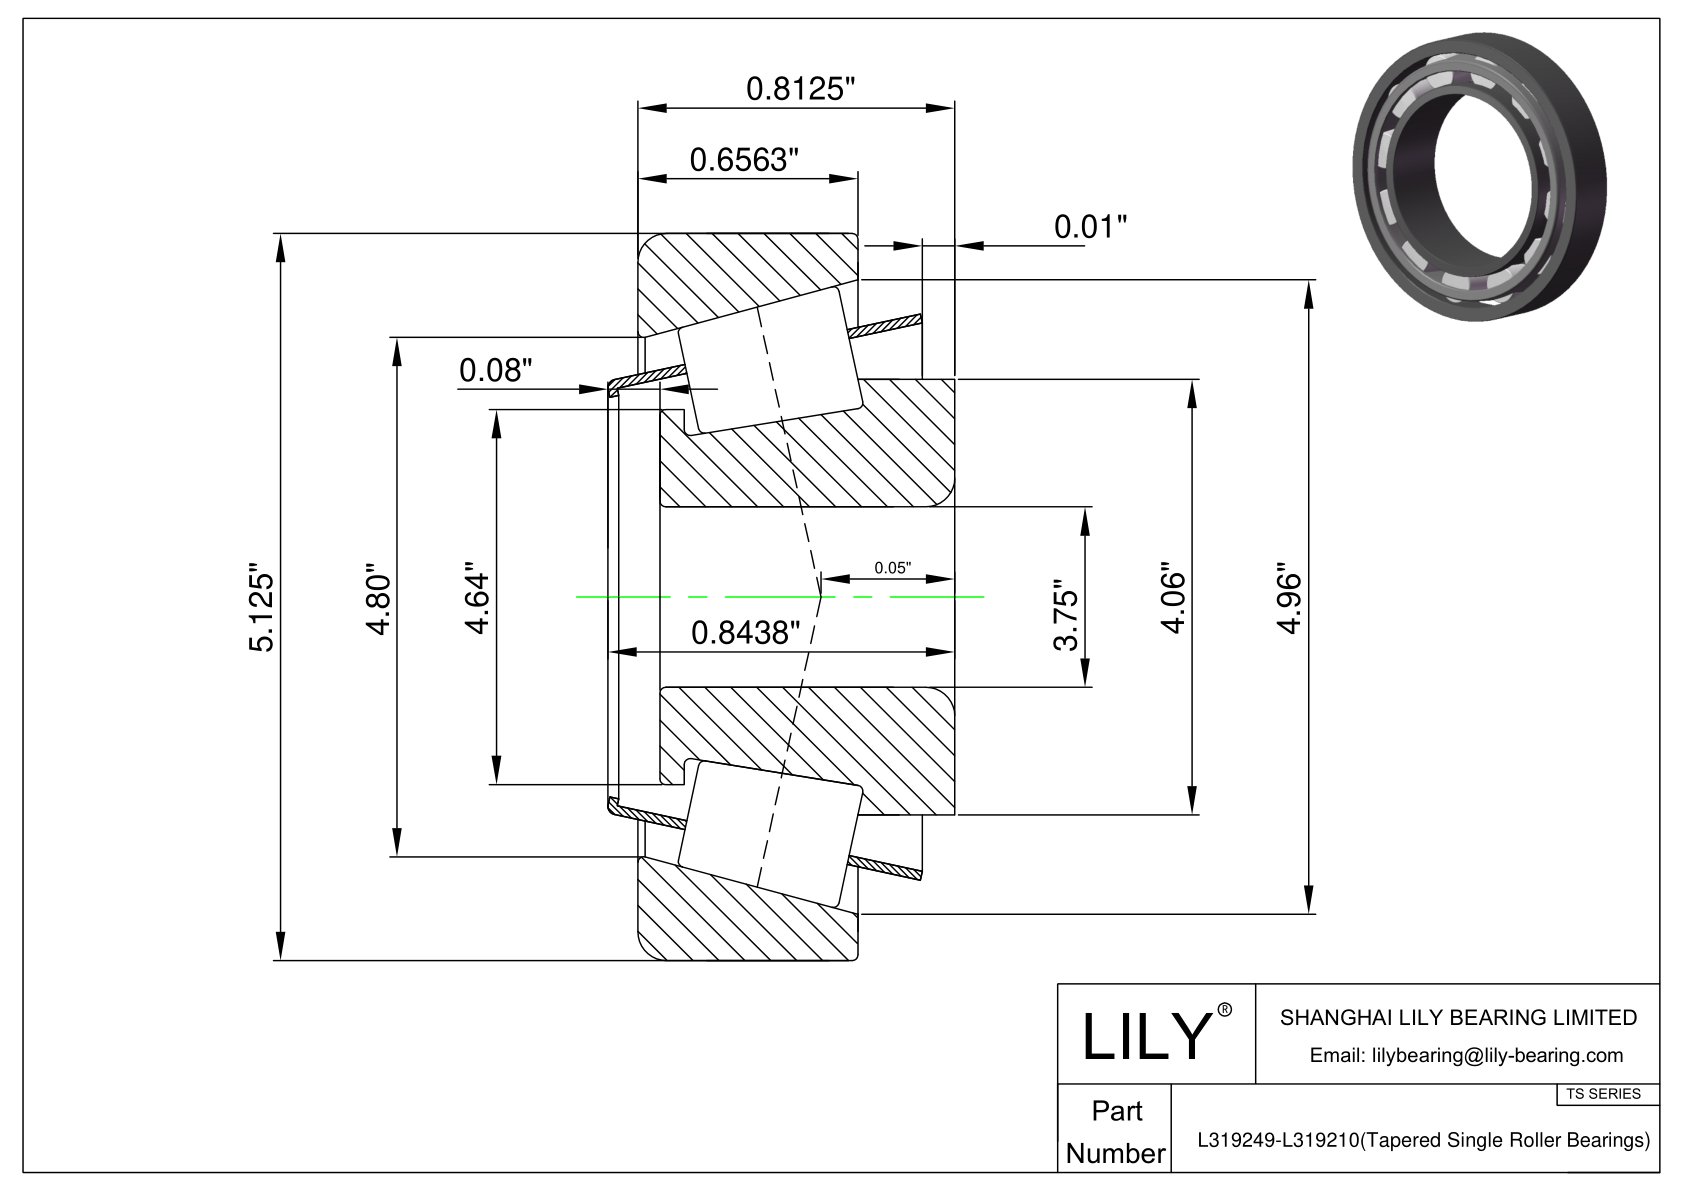 L319249-L319210 TS (Tapered Single Roller Bearings) (Imperial) cad drawing